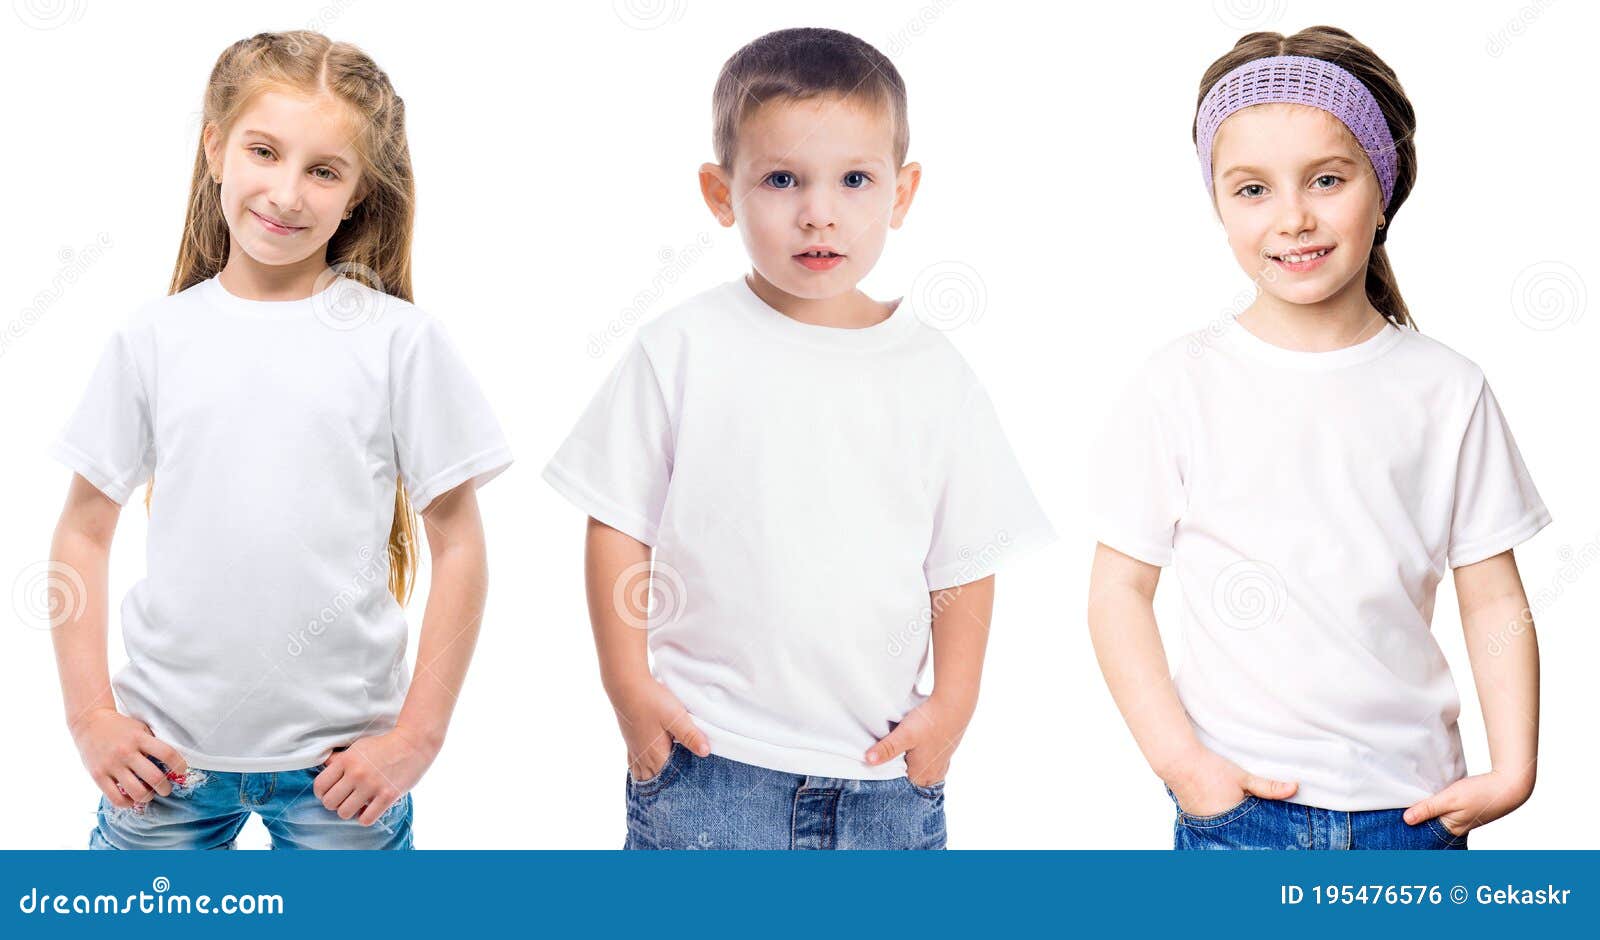 510 Blank Tshirts No Model Royalty-Free Images, Stock Photos & Pictures